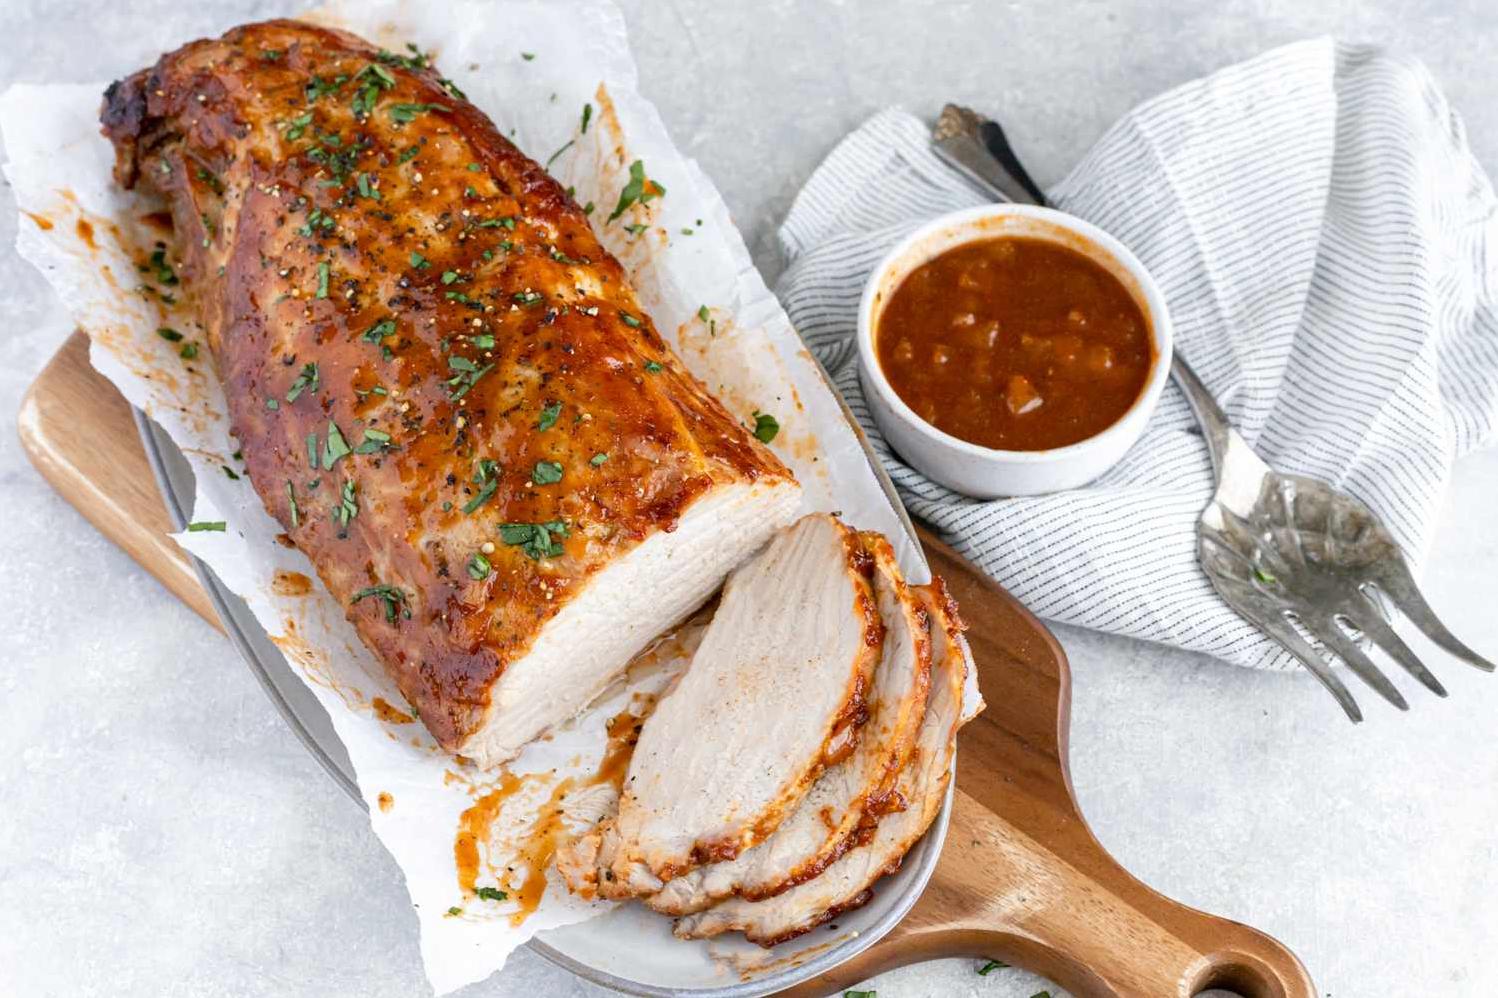  Get ready to sink your teeth into some juicy, fall-off-the-bone southern barbecued pork roast!